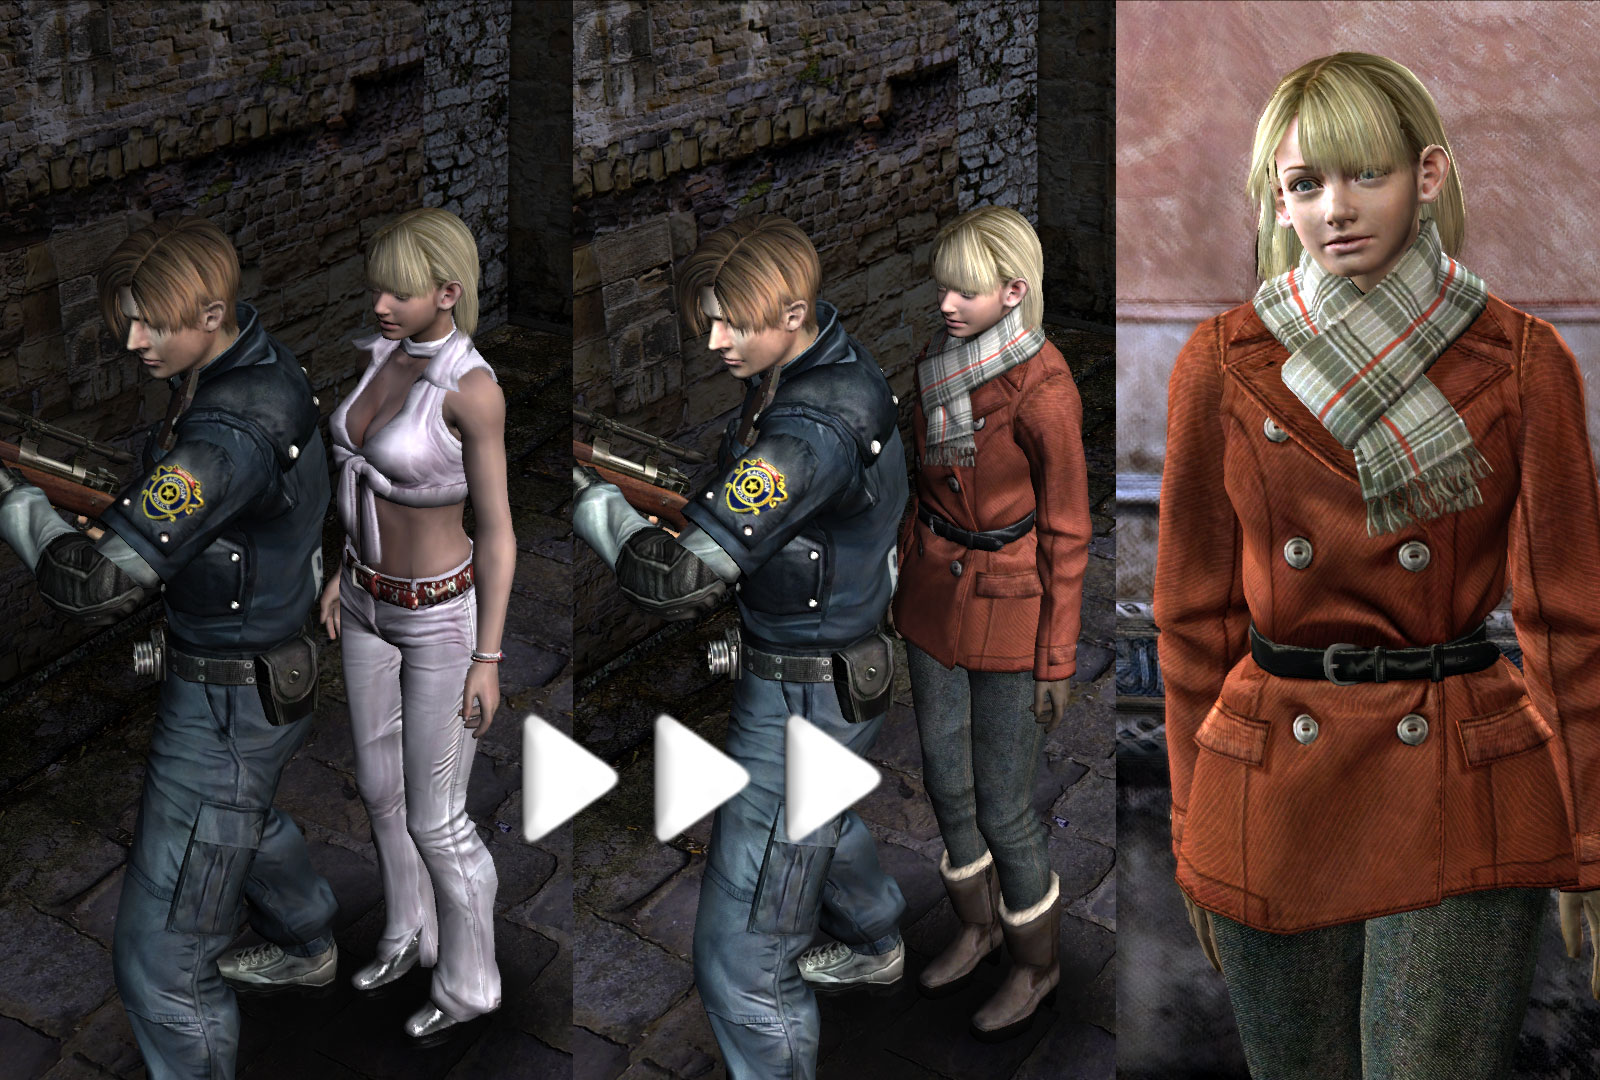 RE4 HD Project on X: Ashley's “Otoño” Costume is waiting to be